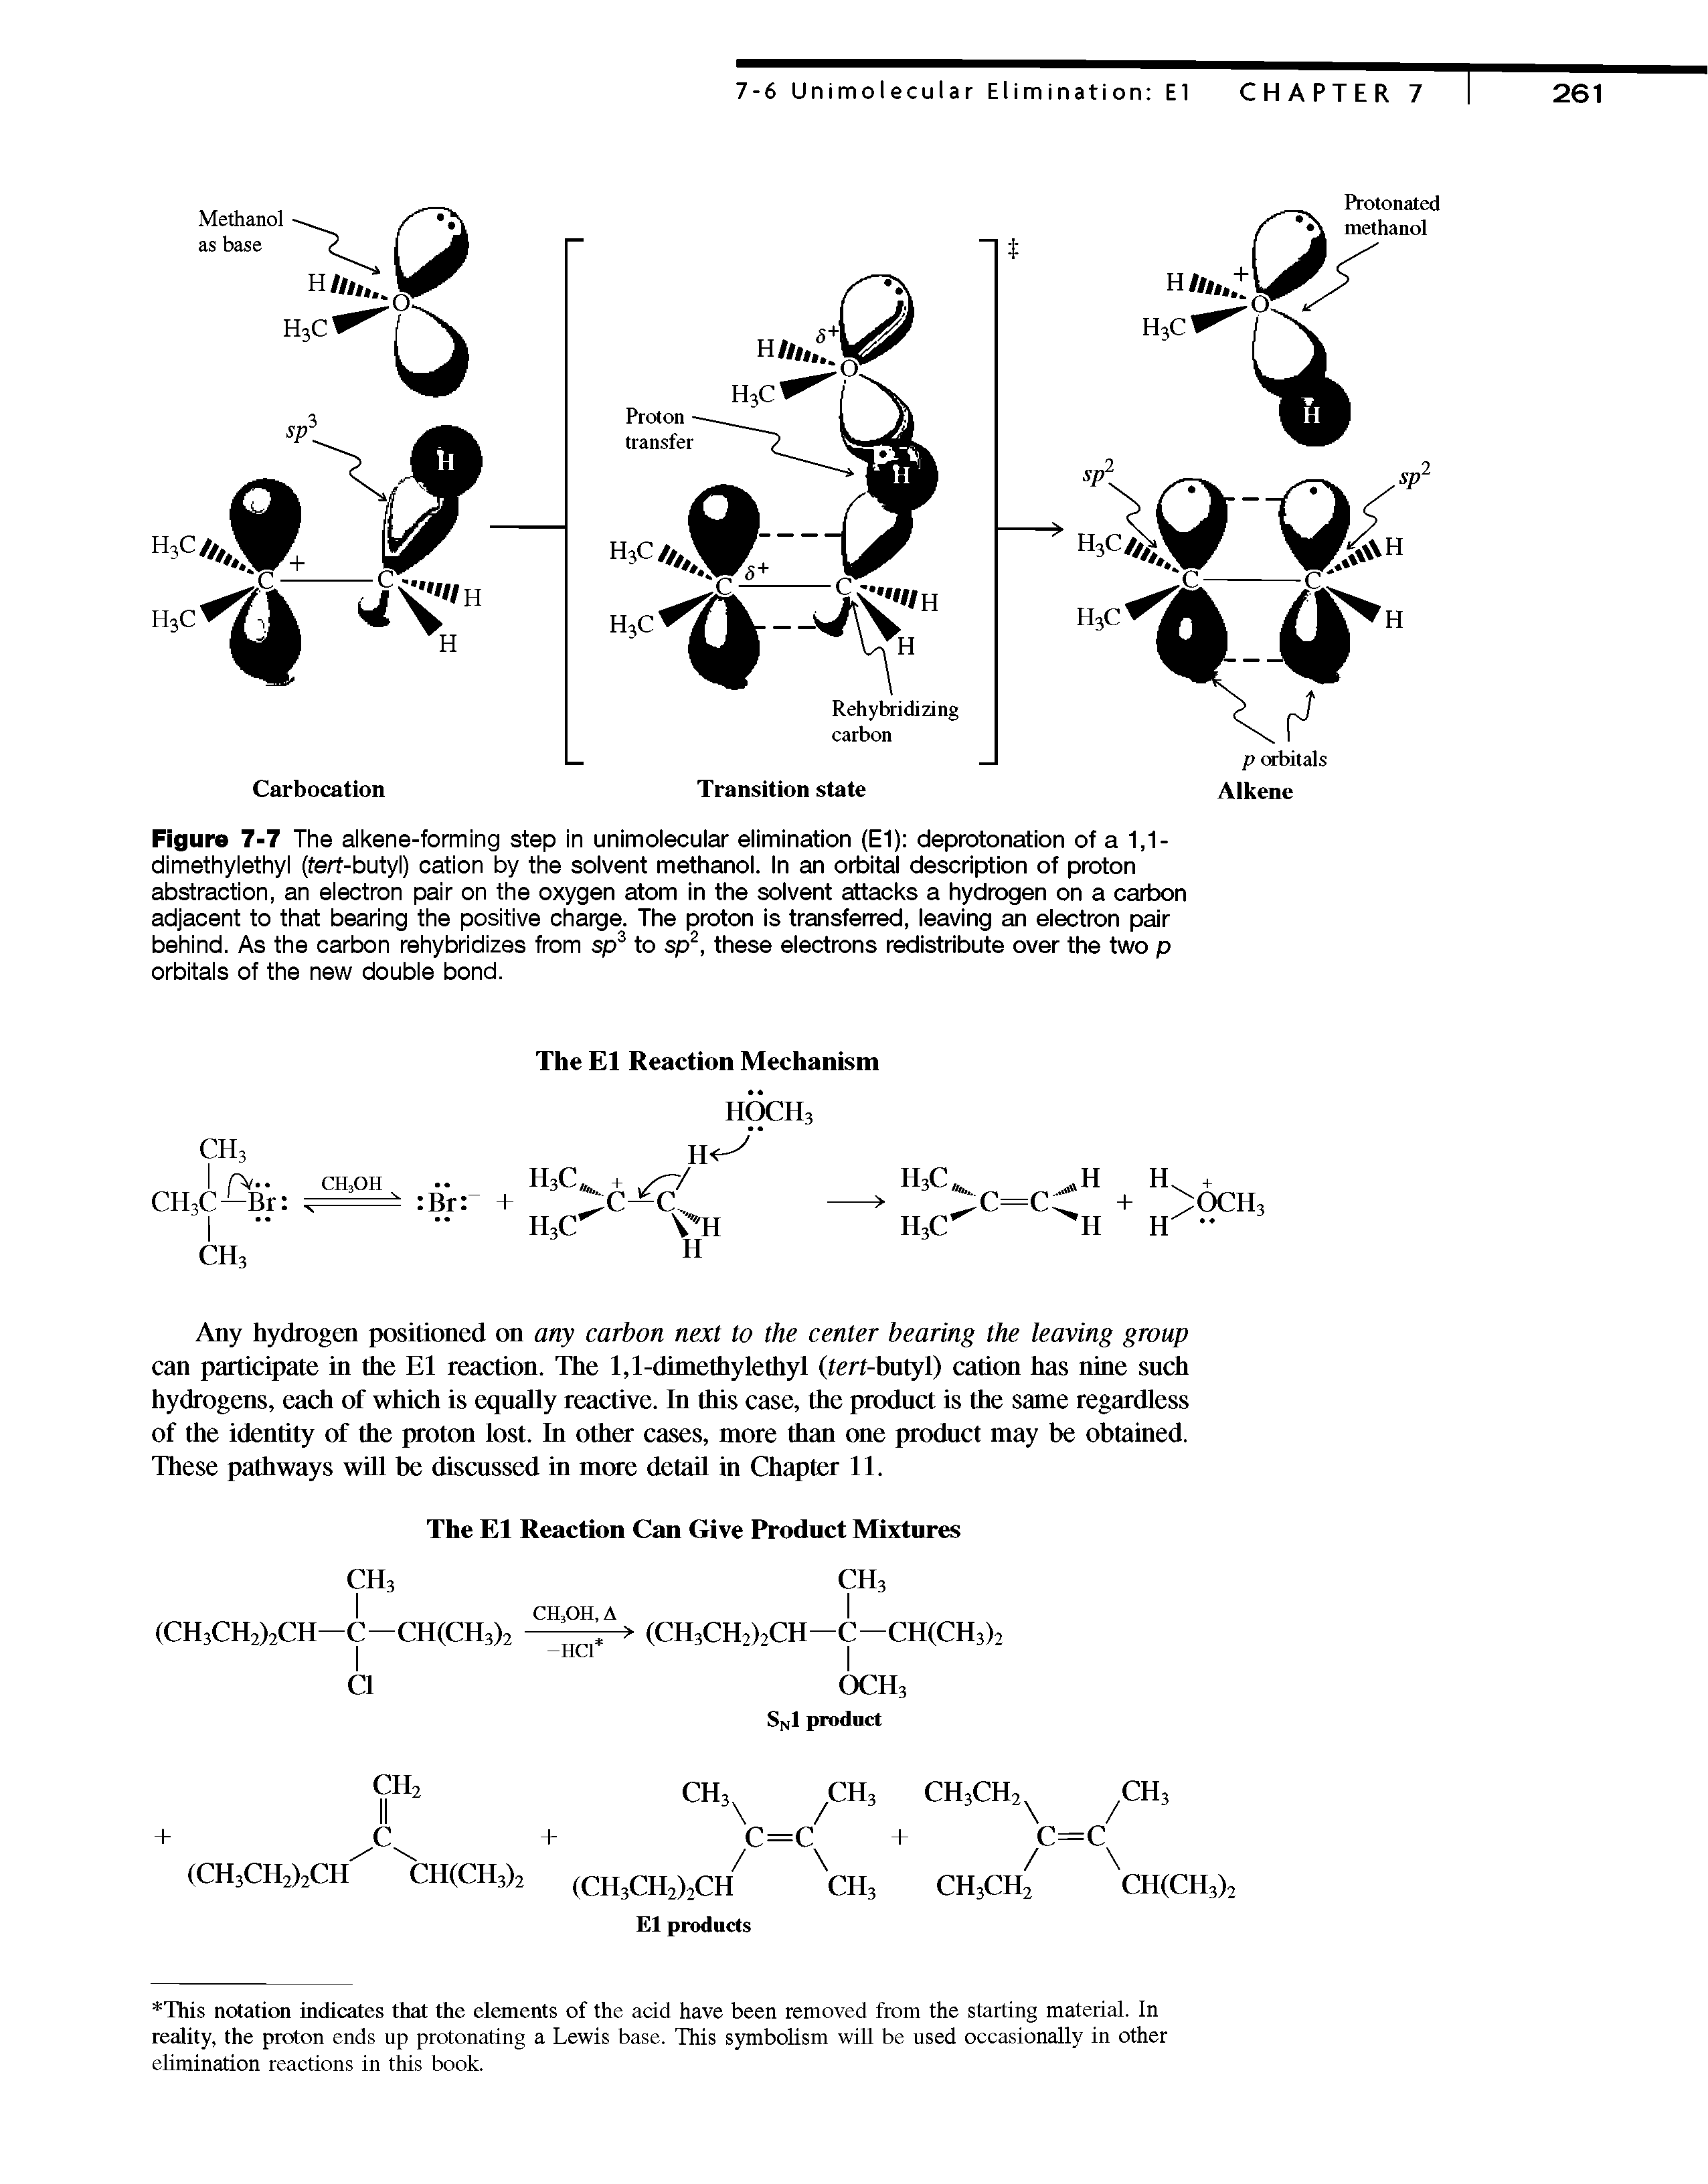 Figure 7-7 The alkene-forming step in unimolecular elimination (El) deprotonation of a 1,1-dimethylethyl (fert-butyl) cation by the solvent methanol. In an orbital description of proton abstraction, an eiectron pair on the oxygen atom in the solvent attacks a hydrogen on a carbon adjacent to that bearing the positive charge. The proton is transferred, leaving an electron pair behind. As the carbon rehybridizes from sp to sp, these electrons redistribute over the two p orbitals of the new double bond.